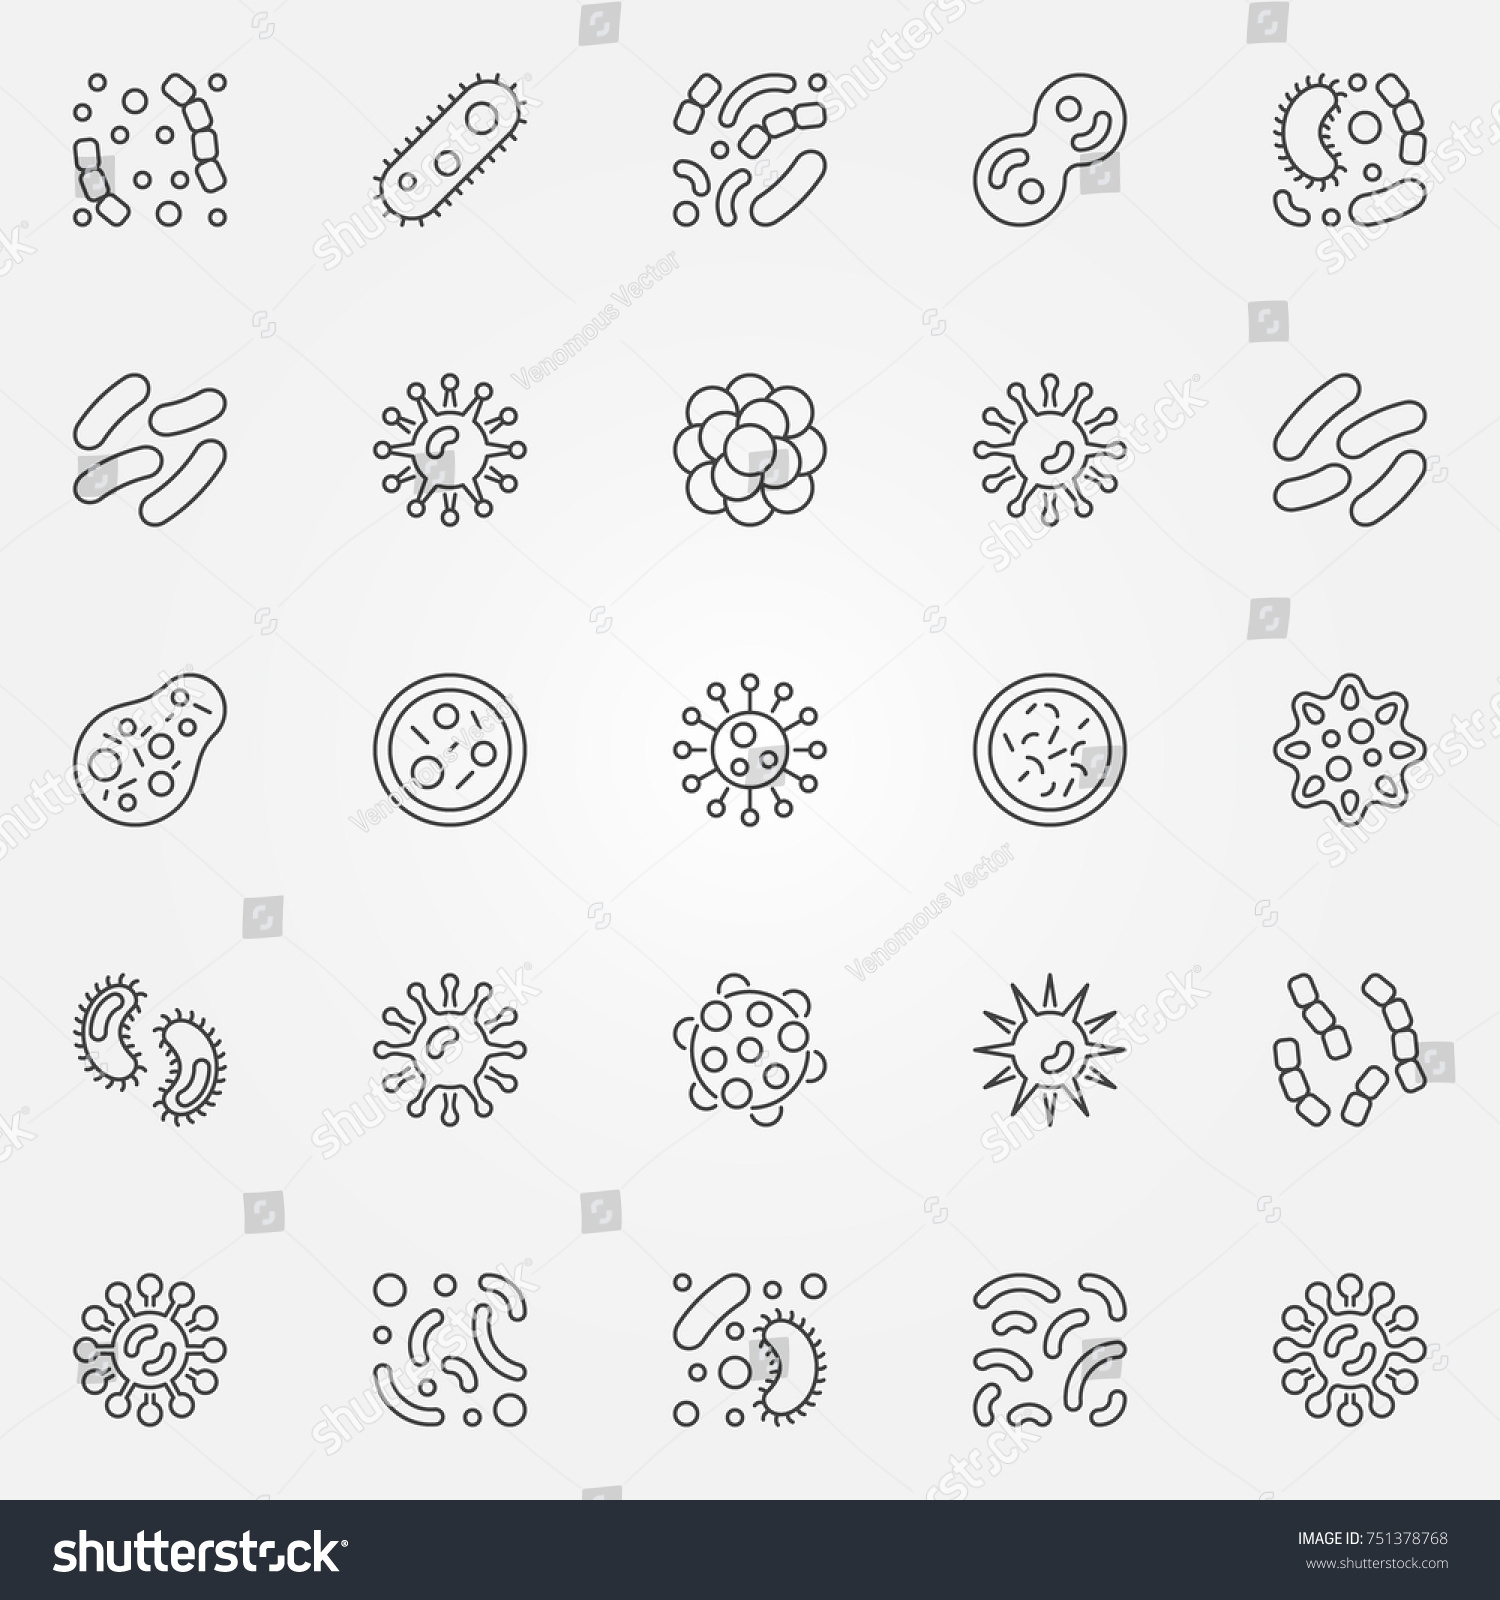 Bacteria icons set - vector collection of virus and pathogen concept symbols in thin line style #751378768